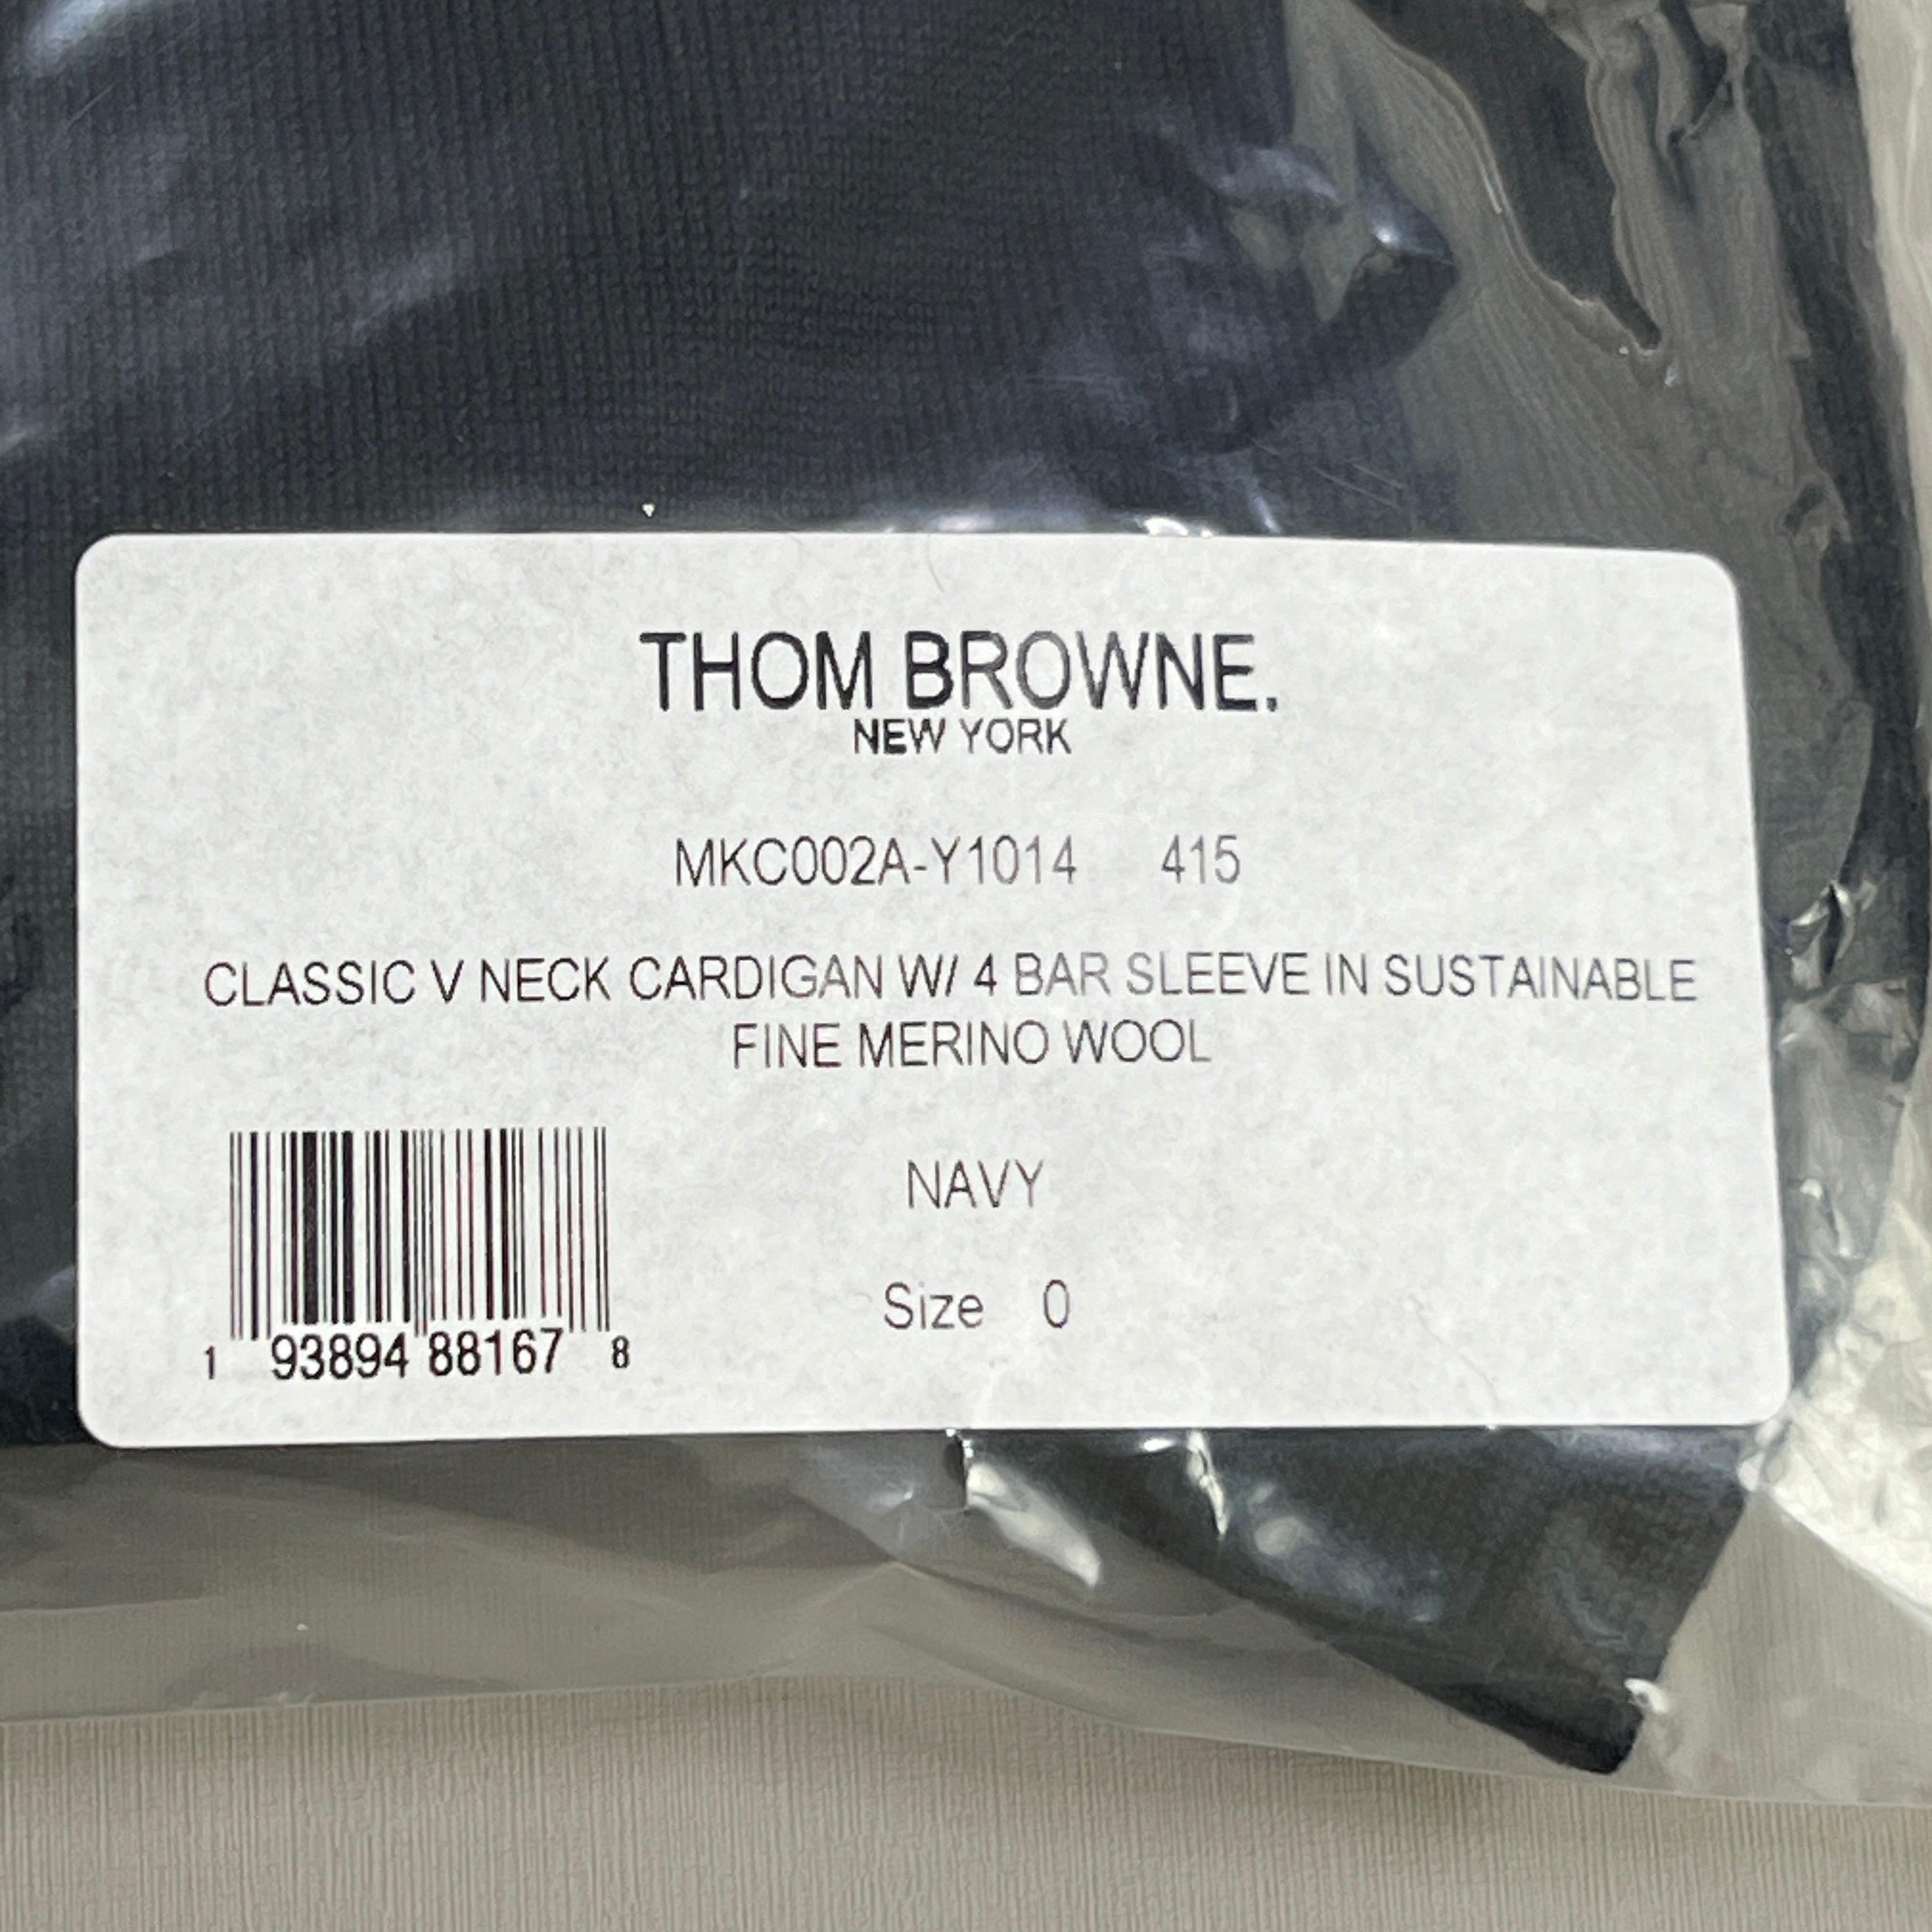 THOM BROWNE V-NECK Cardigan w/ 4Bar Sleeve in Sustainable Fine